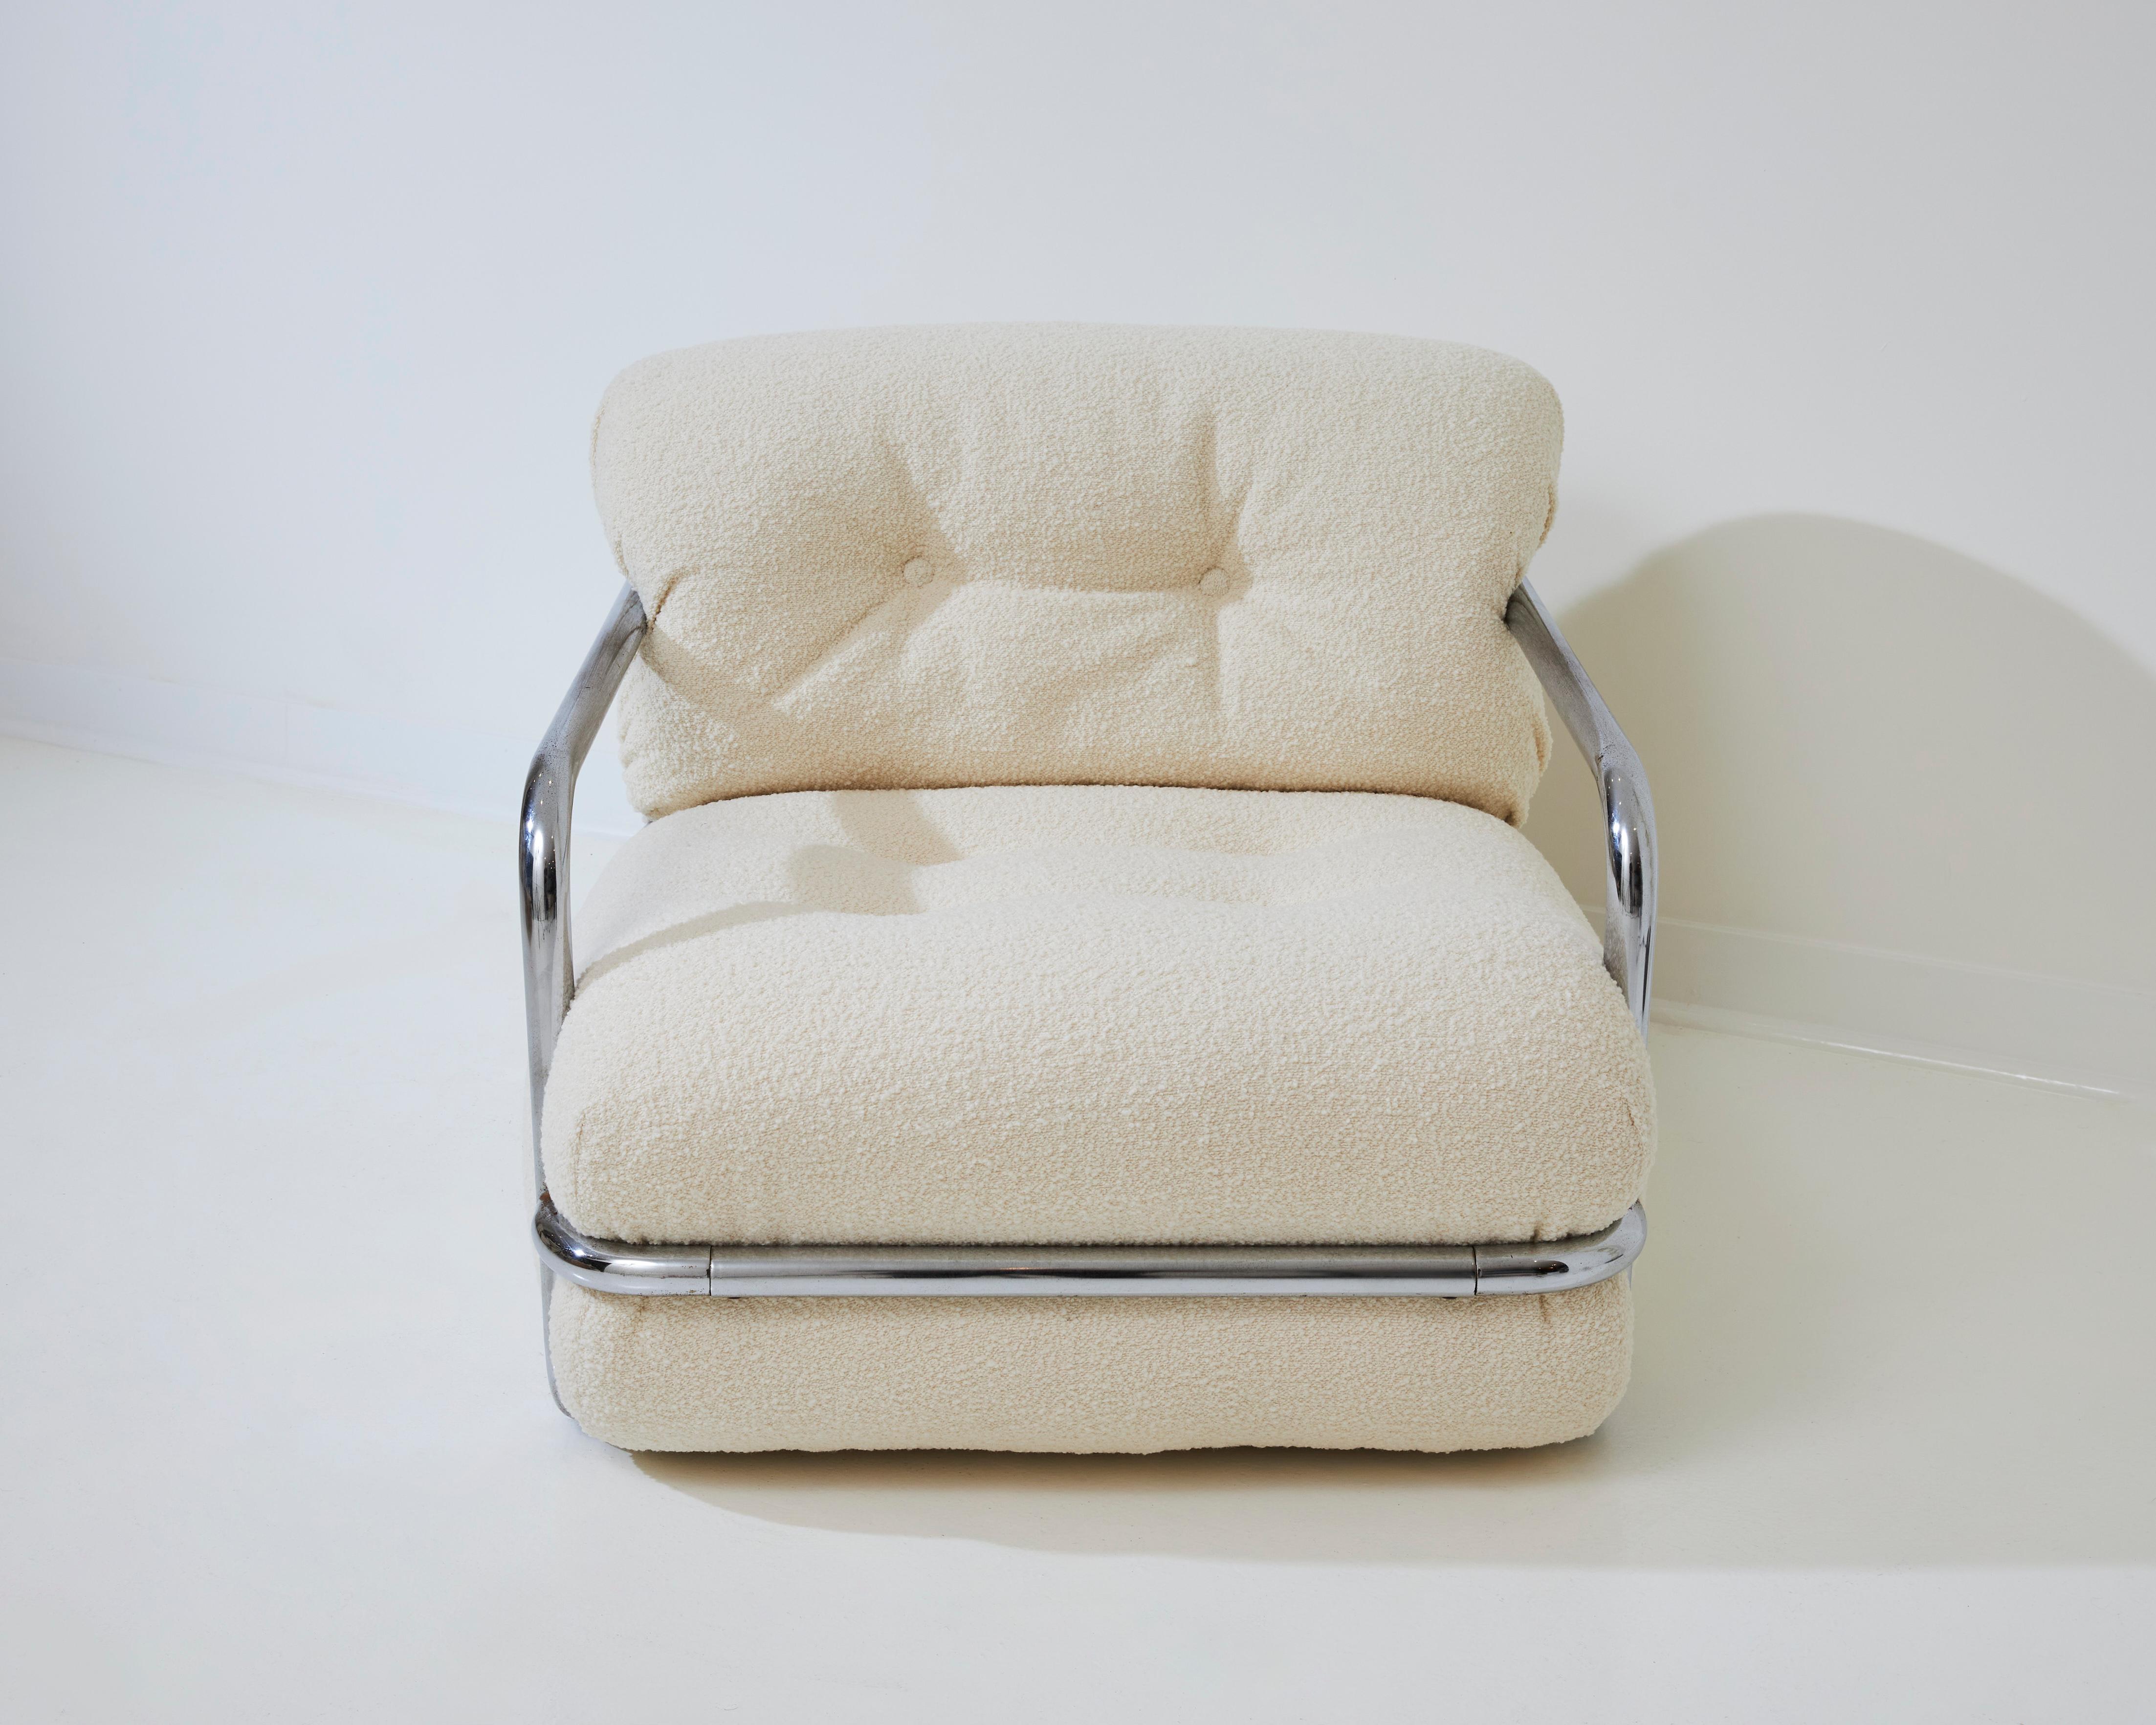 This Mario Sabot armchair was crafted in Italy in the 1970s, designed for Mario Sabot's Atelier. It has been refurbished with exquisite white bouclé wool, enhancing its beauty. The chair features a chromed metal structure, reflecting Sabot's